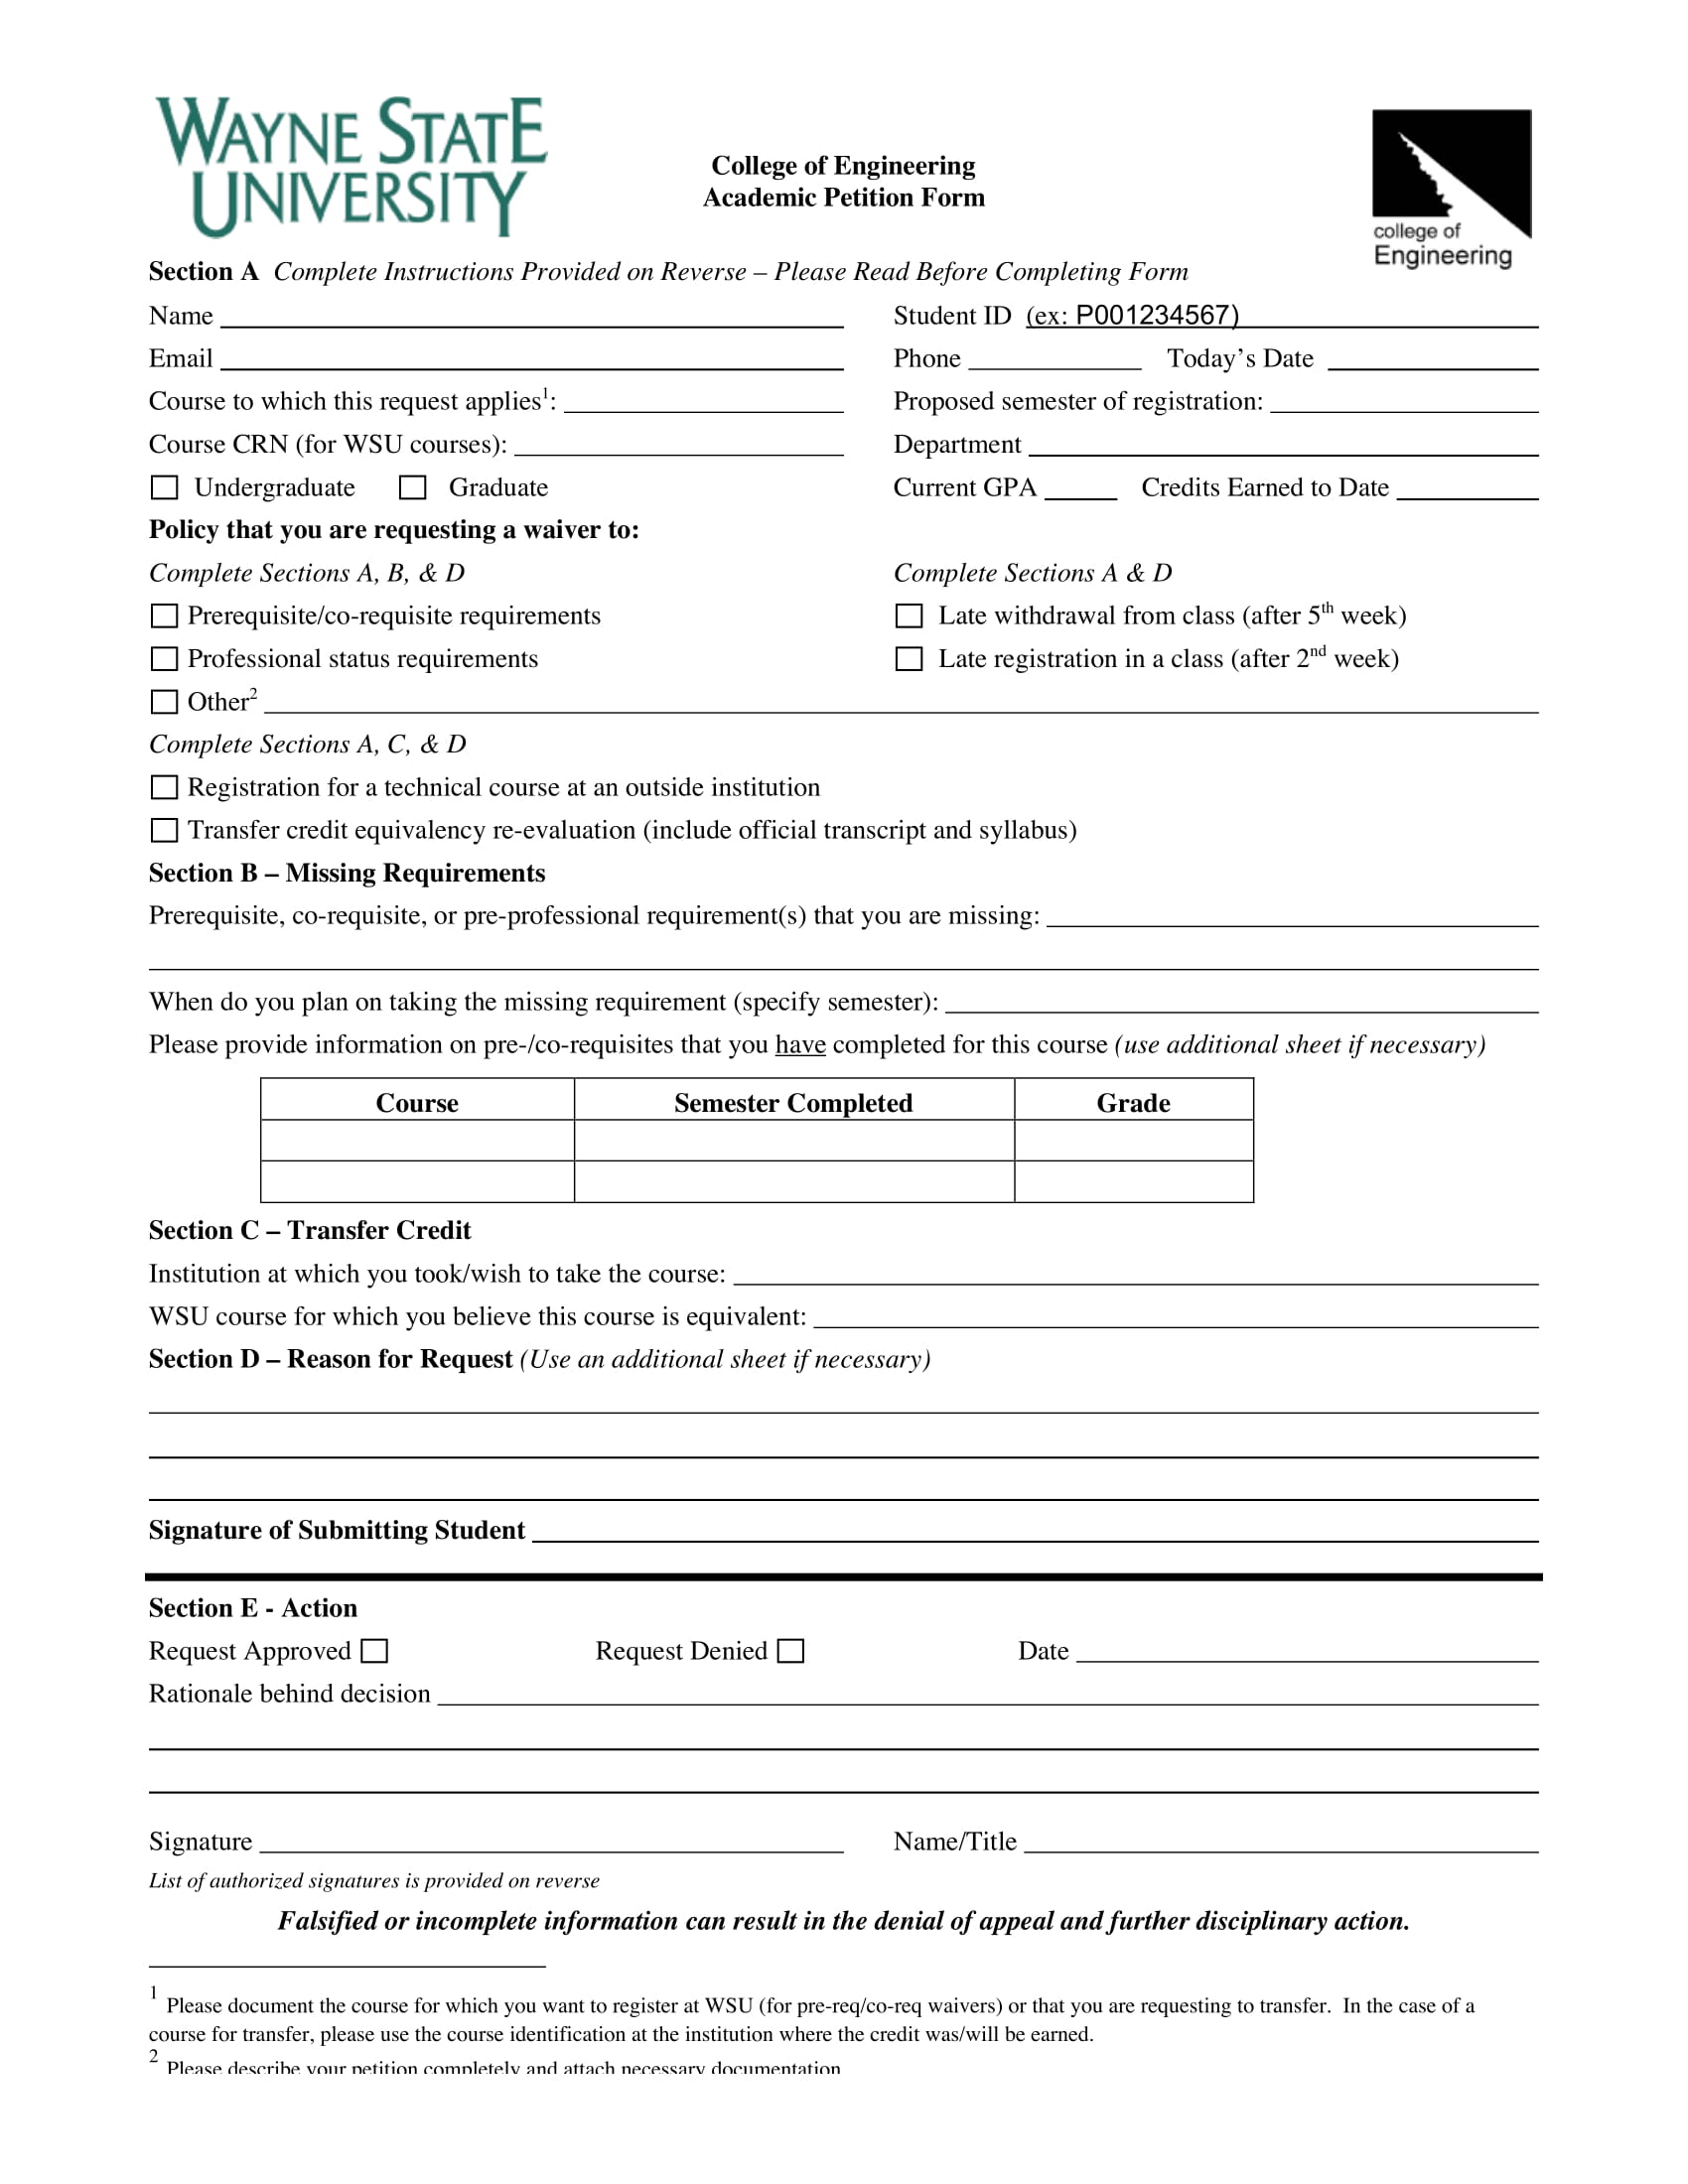 sample for academic petition form 1